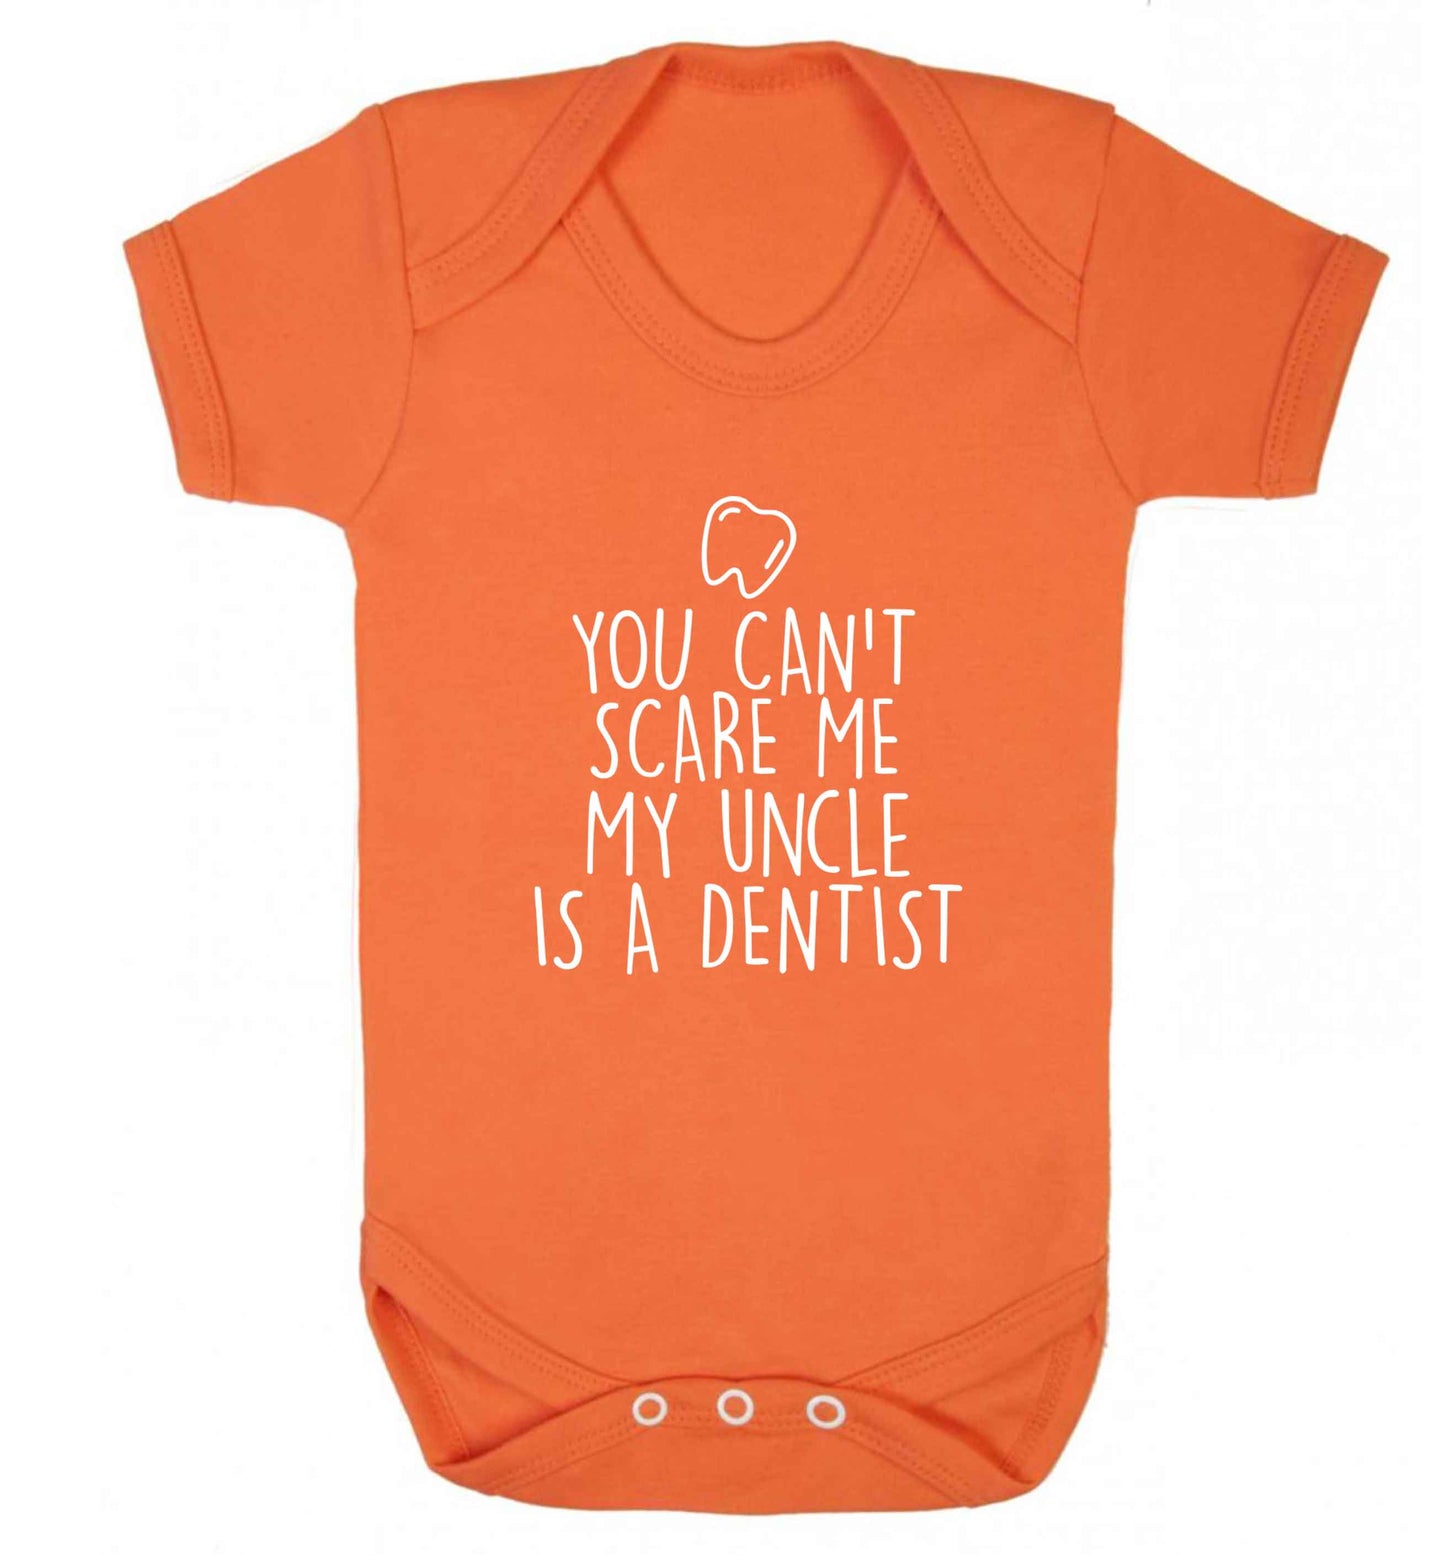 You can't scare me my uncle is a dentist baby vest orange 18-24 months